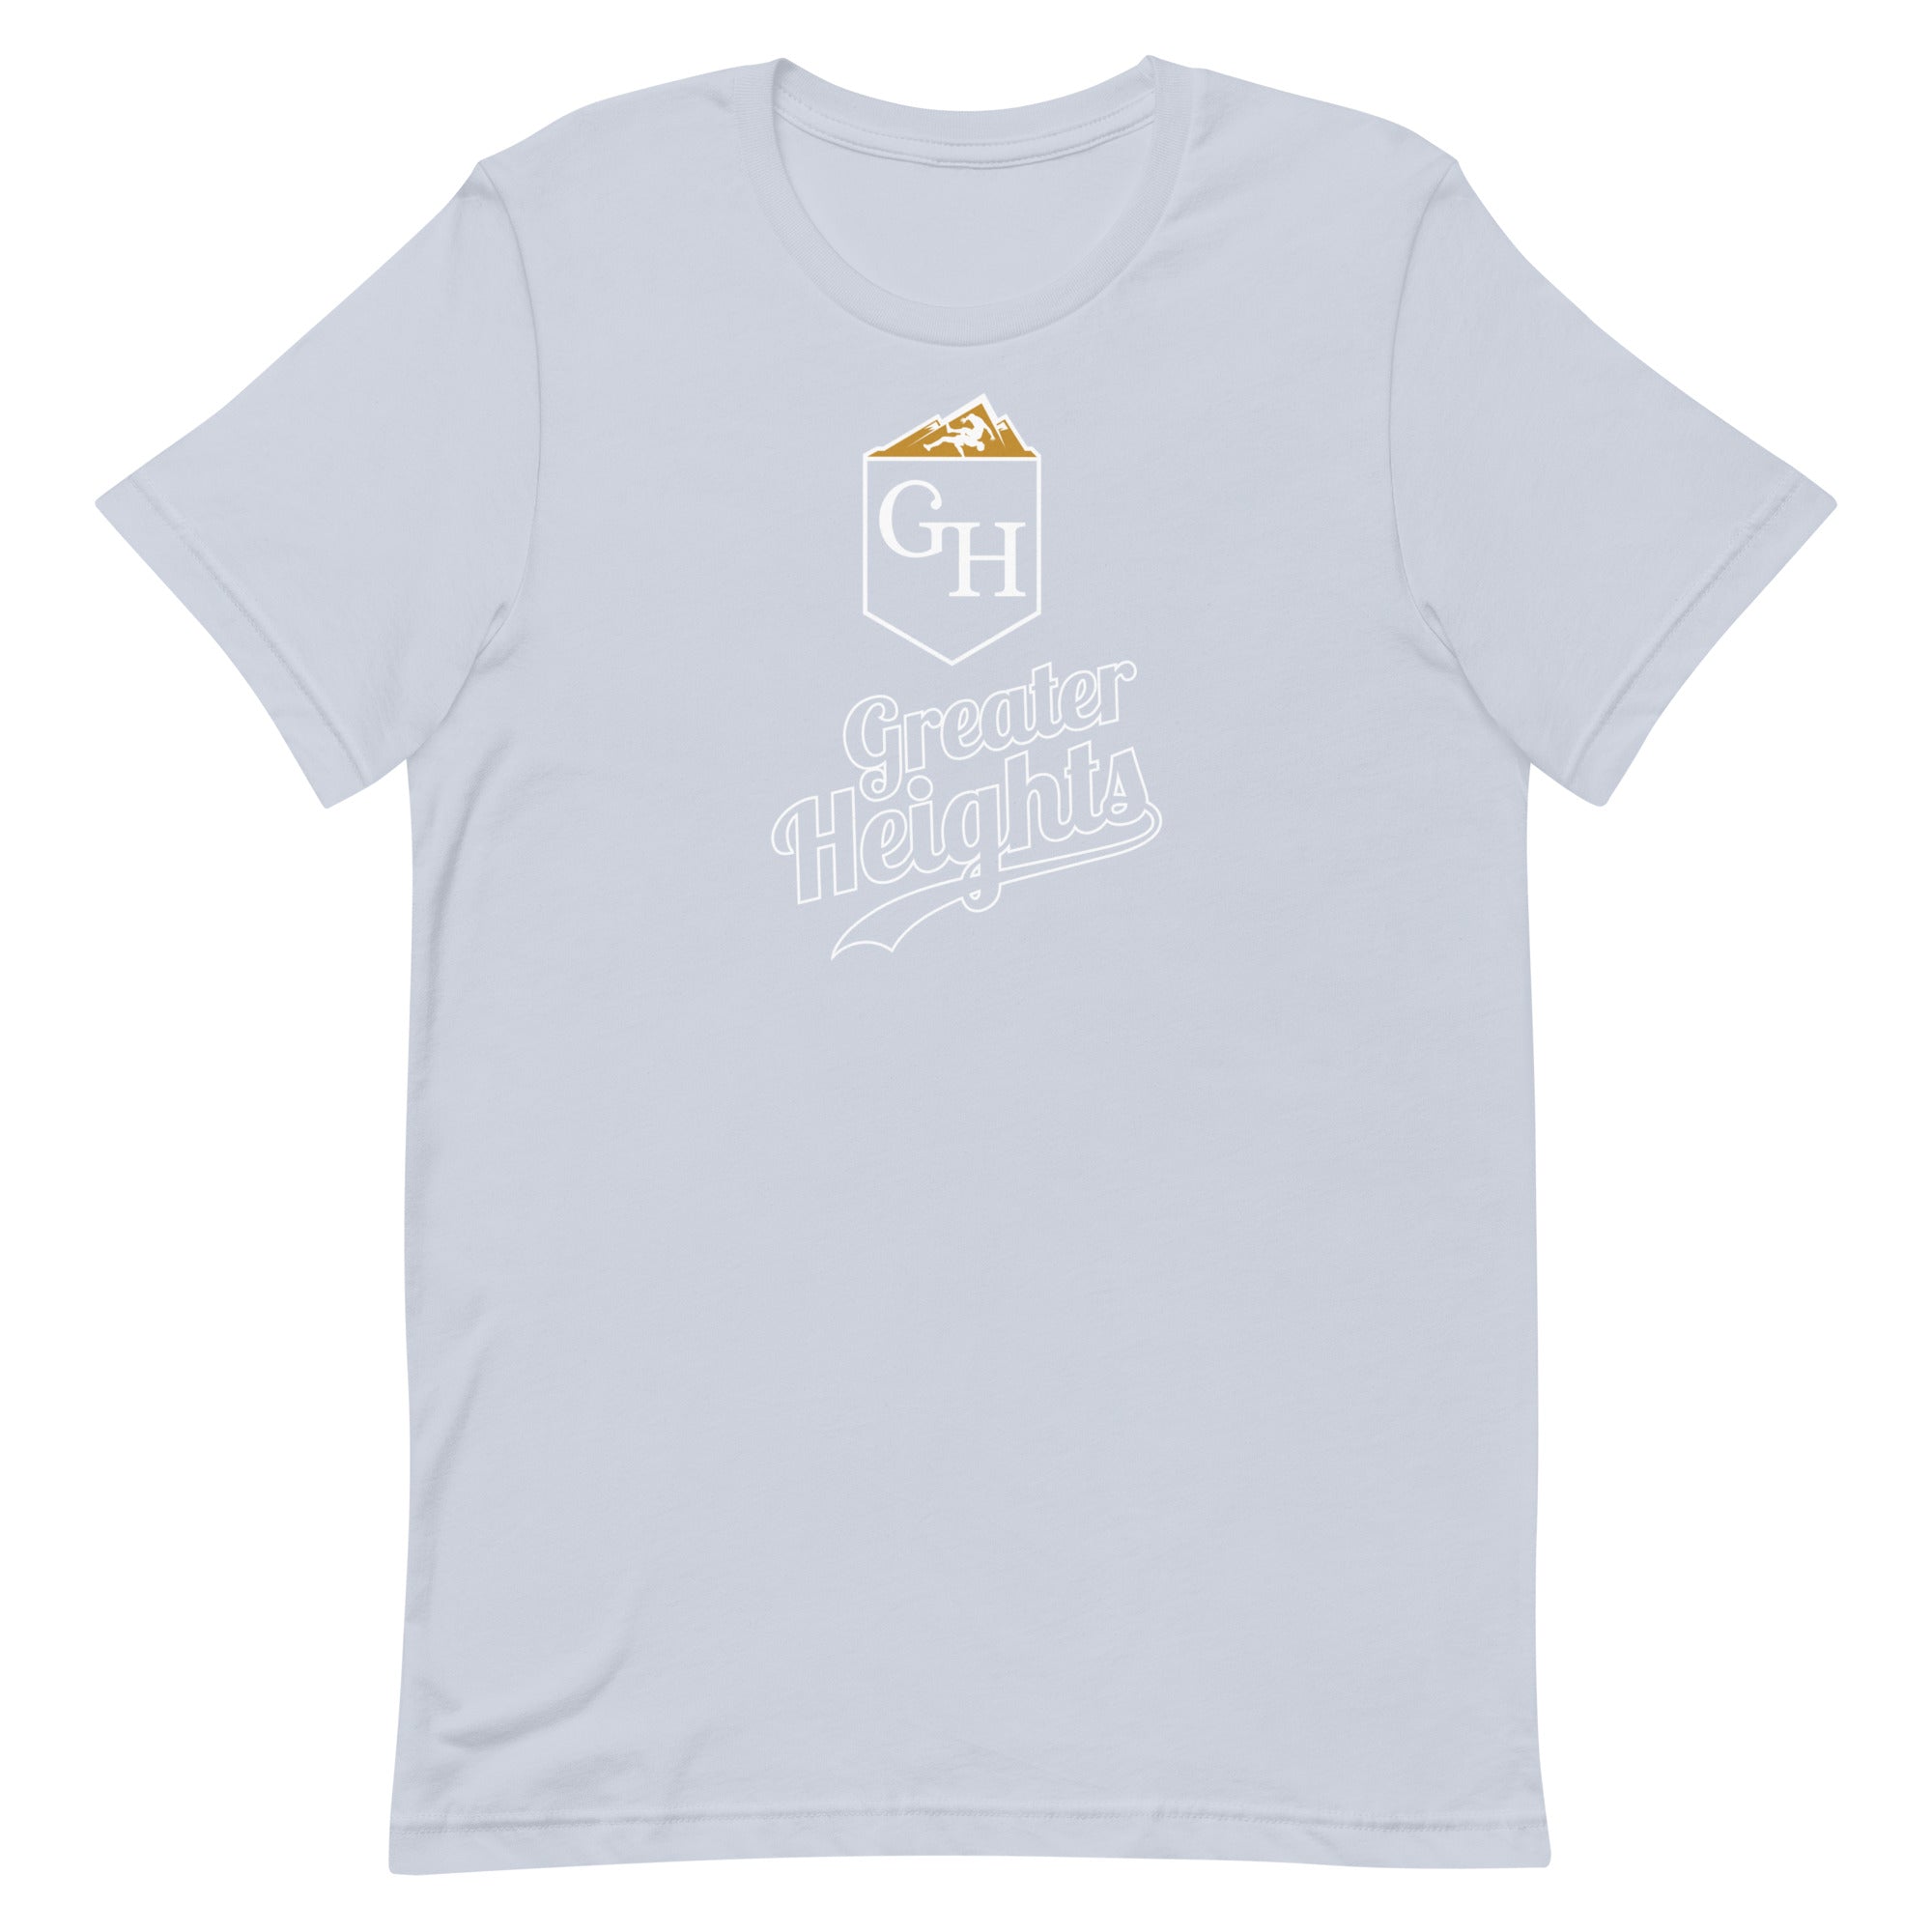 Greater Heights Wrestling Royals Unisex Staple T-Shirt